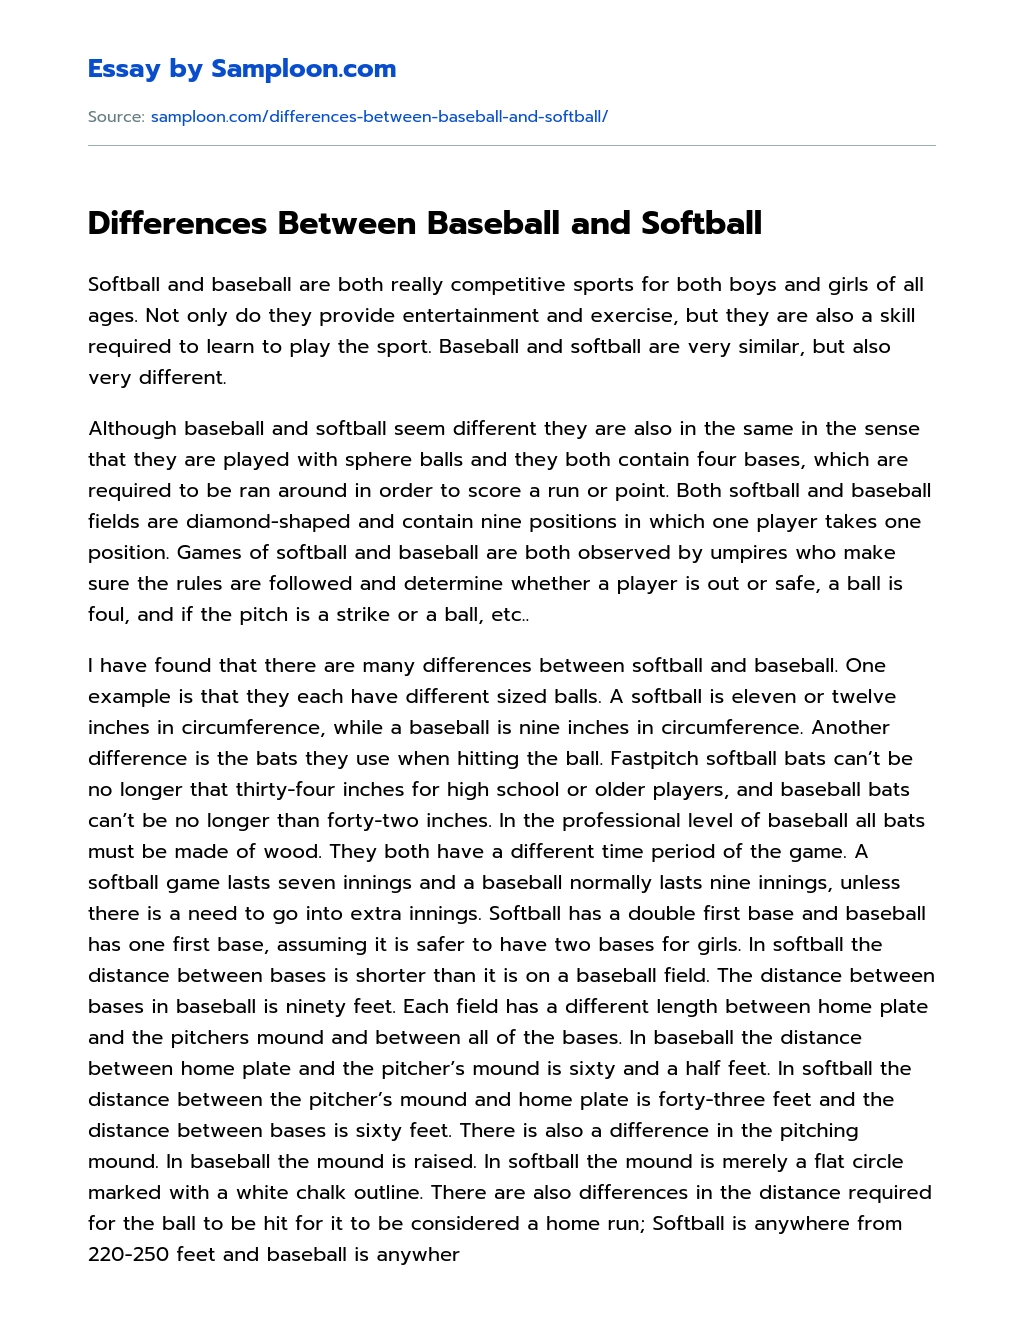 Differences Between Baseball and Softball essay